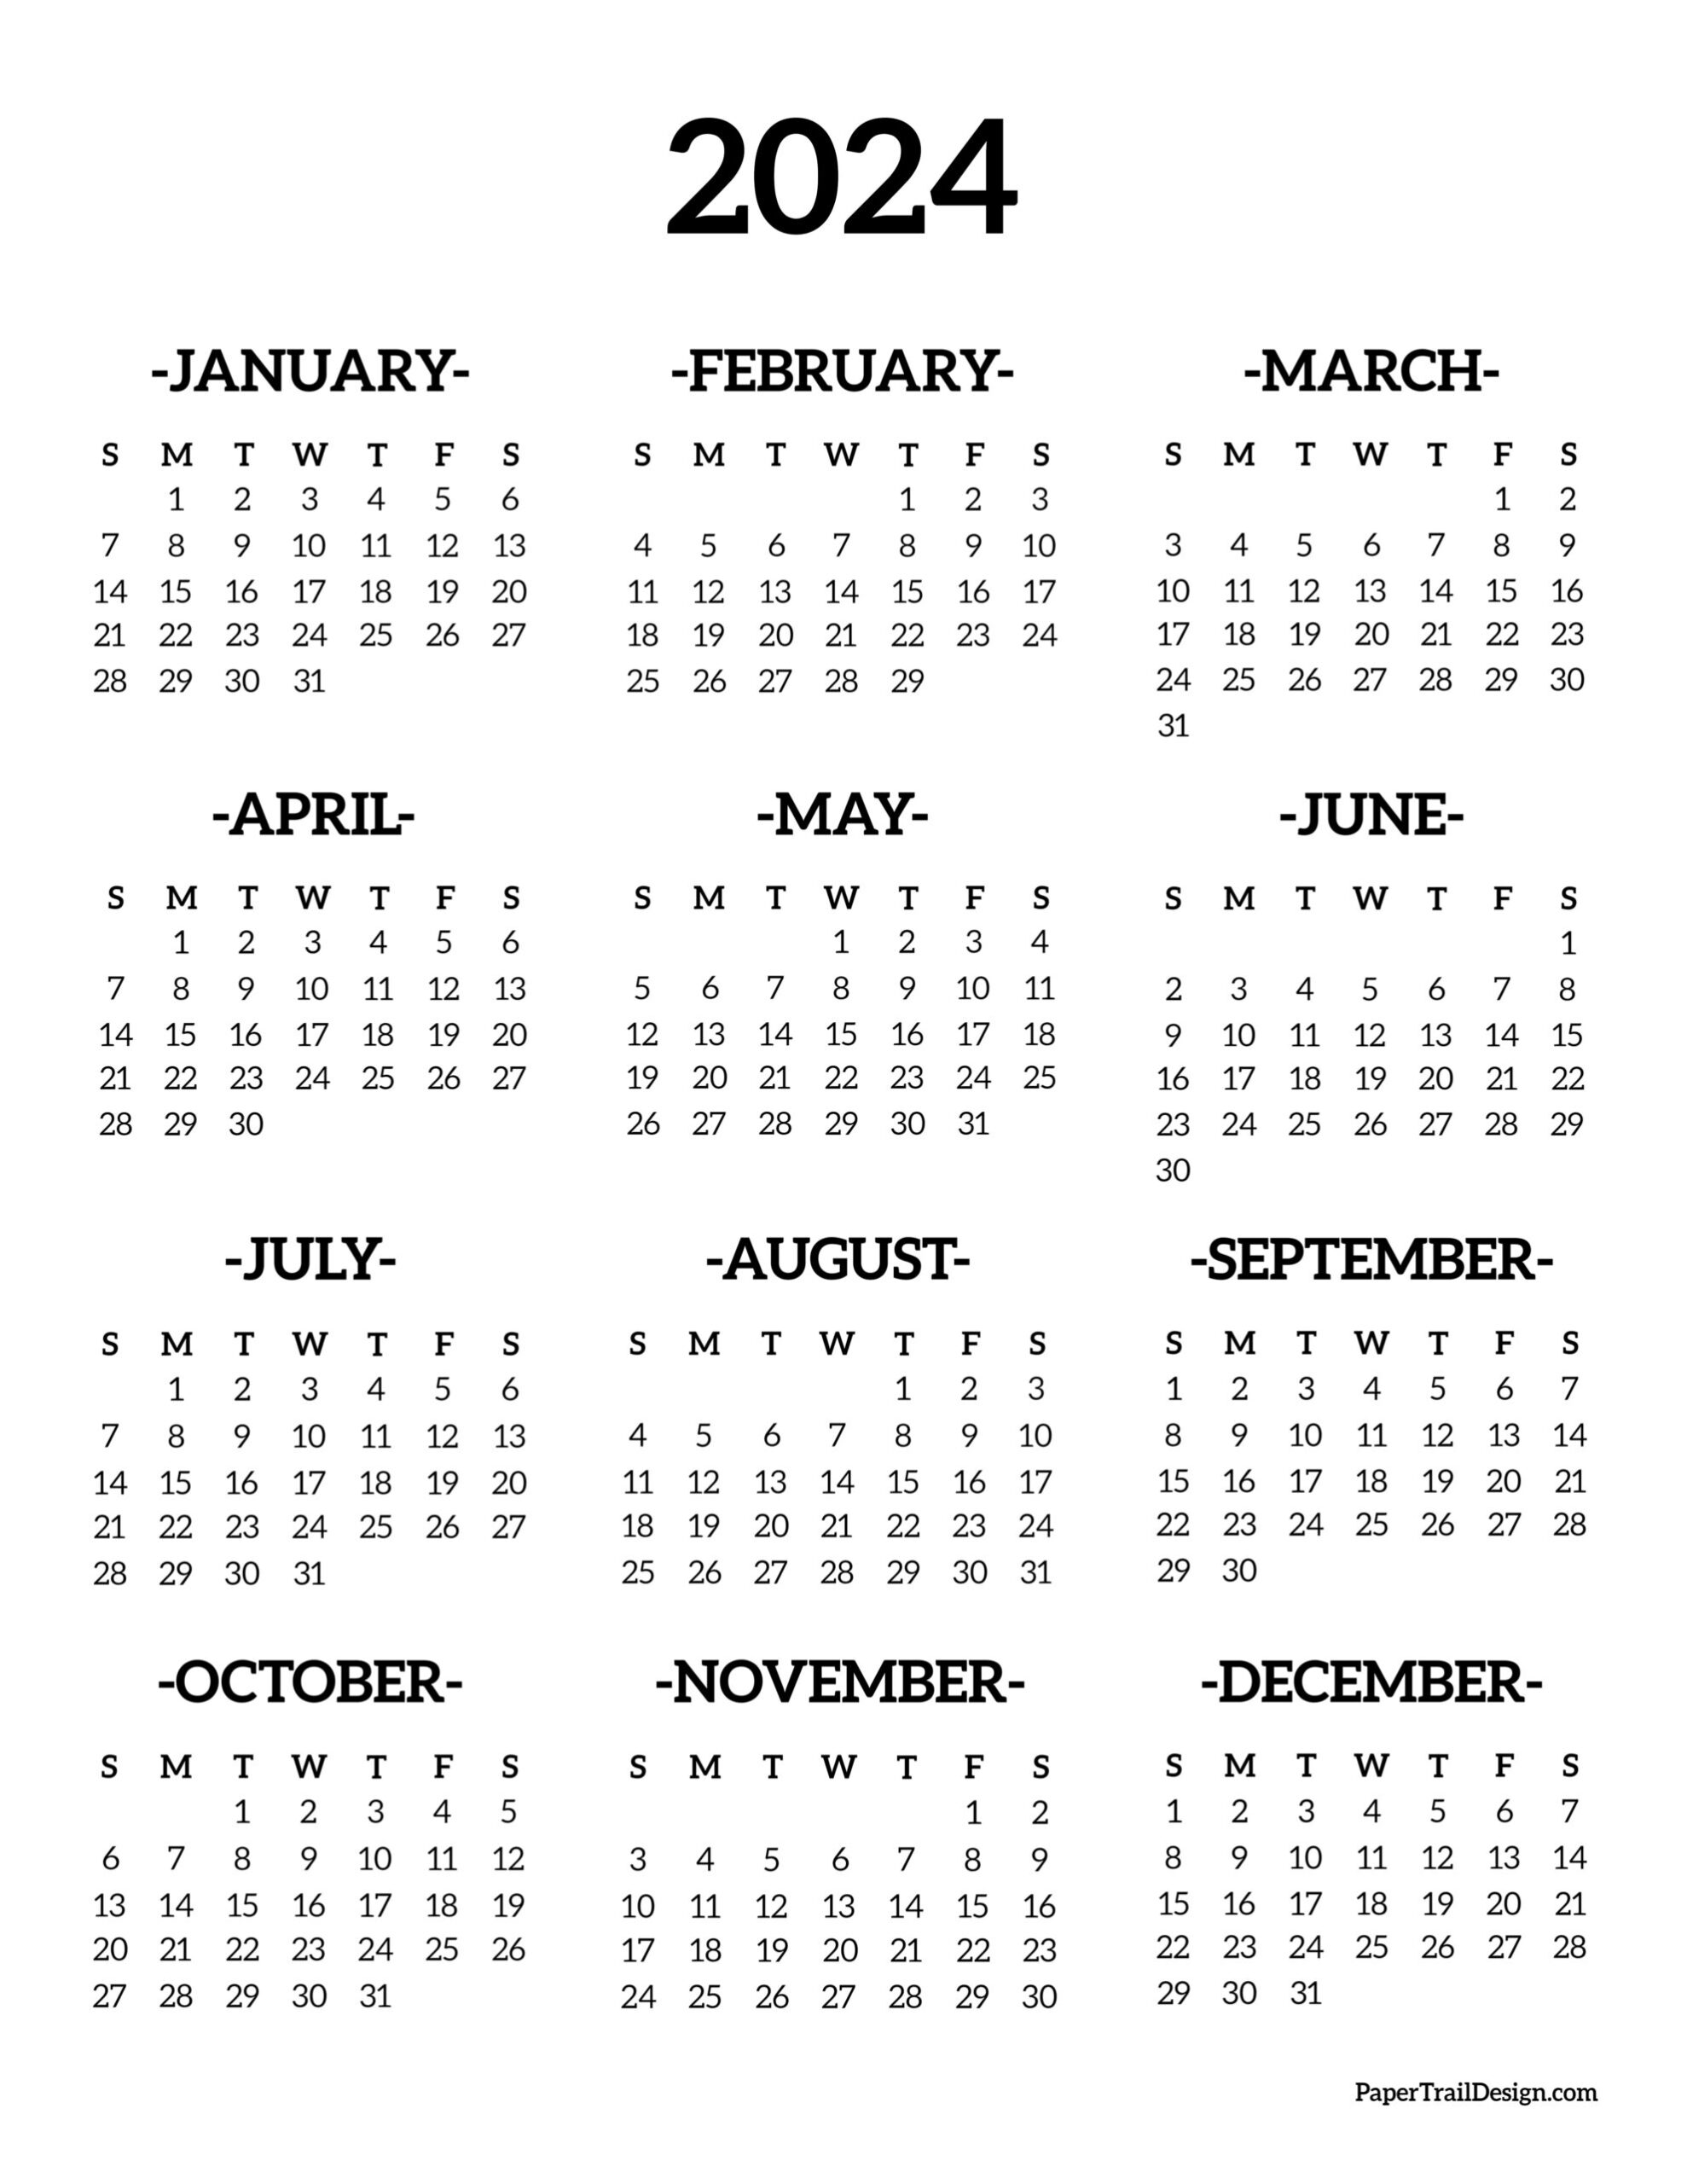 Calendar 2024 Printable One Page - Paper Trail Design for Free Printable 2024 Calendar Year